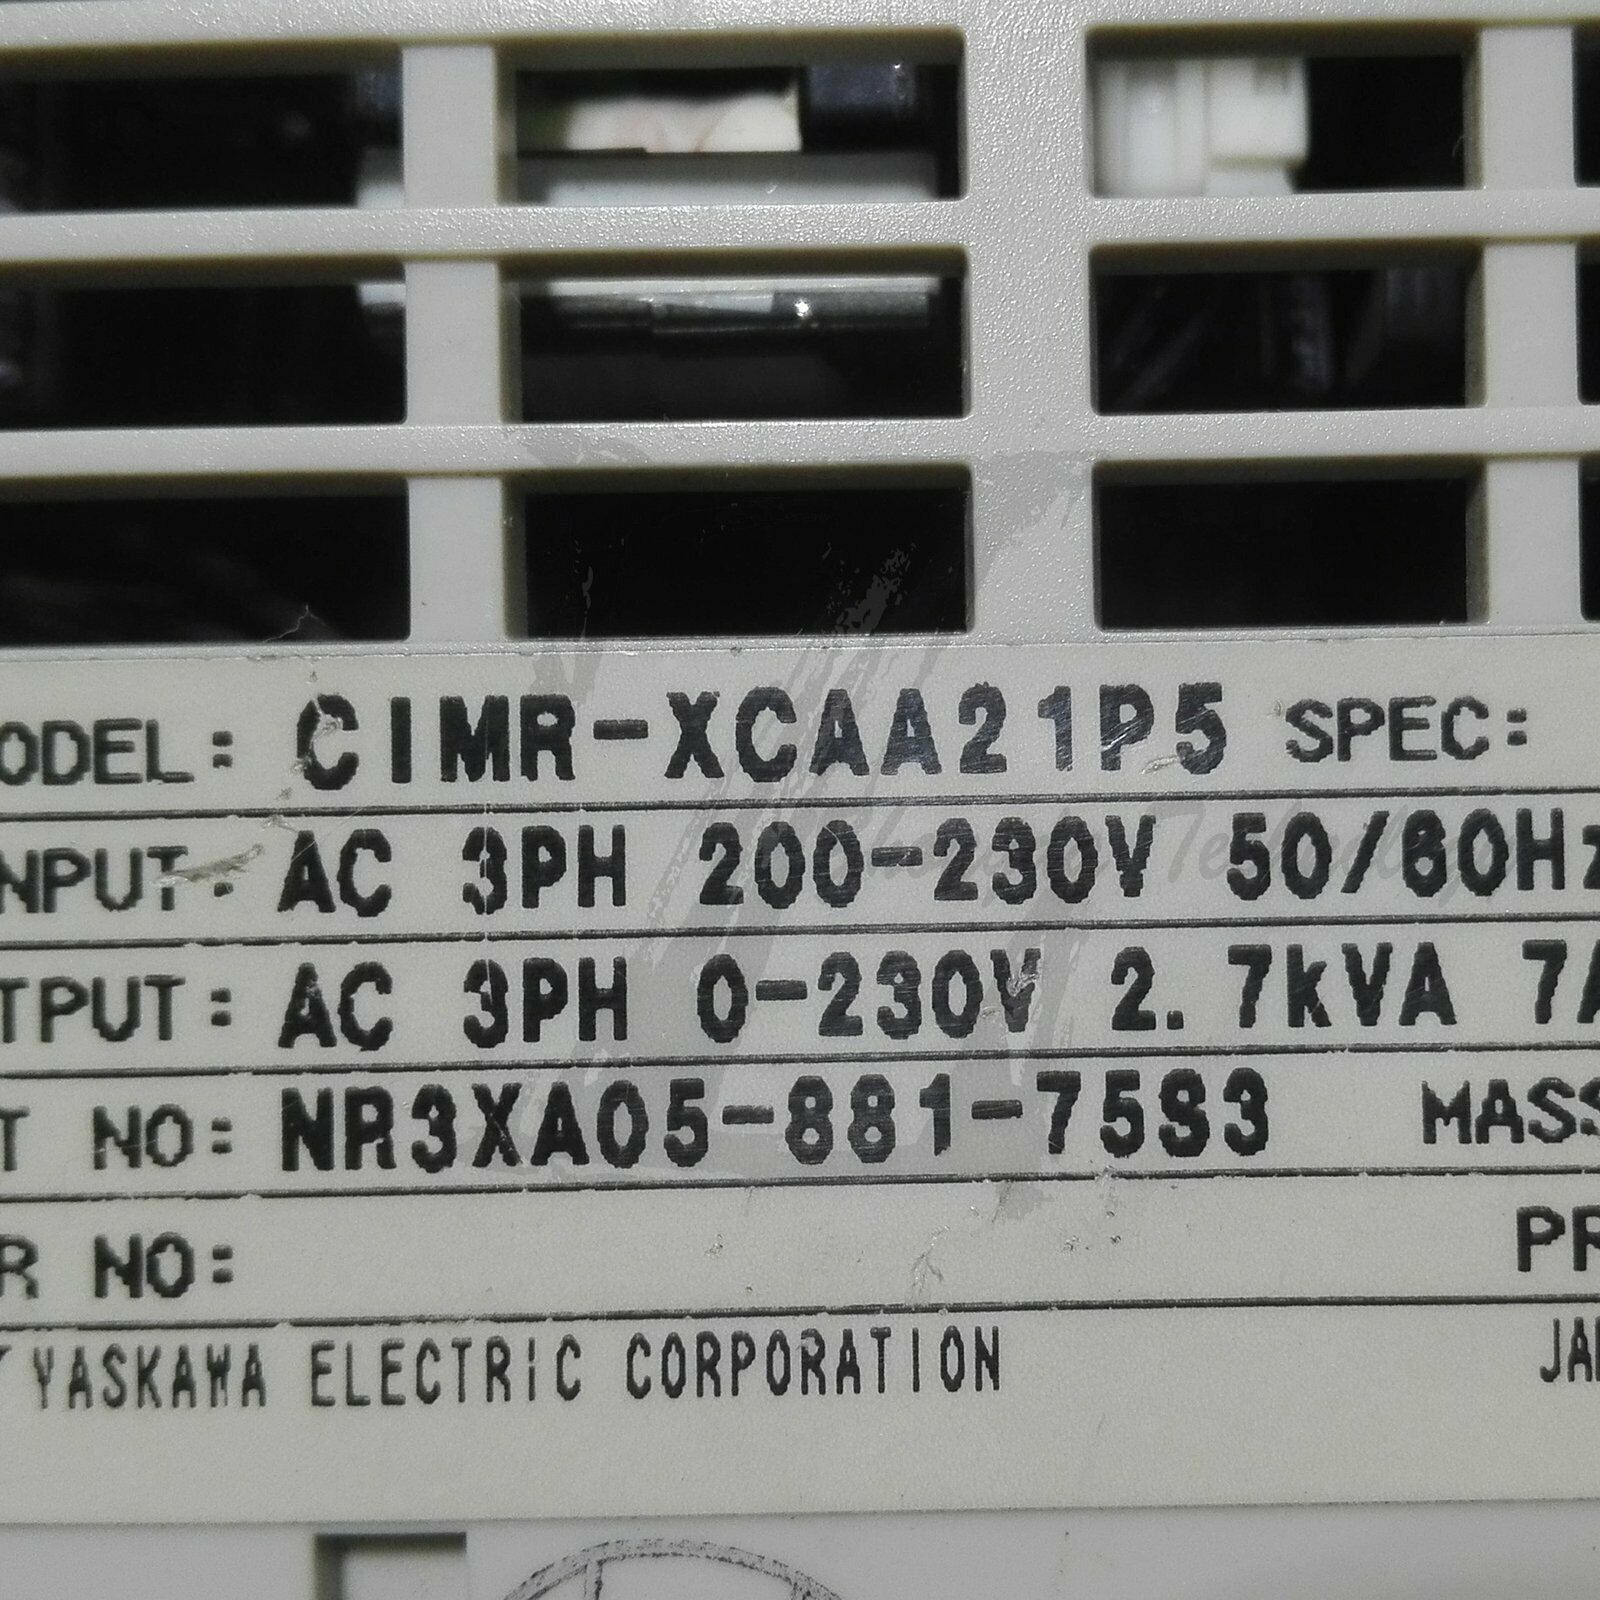 1PC Used Yaskawa CIMR-XCAA 21P5 1.5KW 220V Tested In Good Condition KOEED 201-500, 70%, import_2020_10_10_031751, Other, Yaskawa